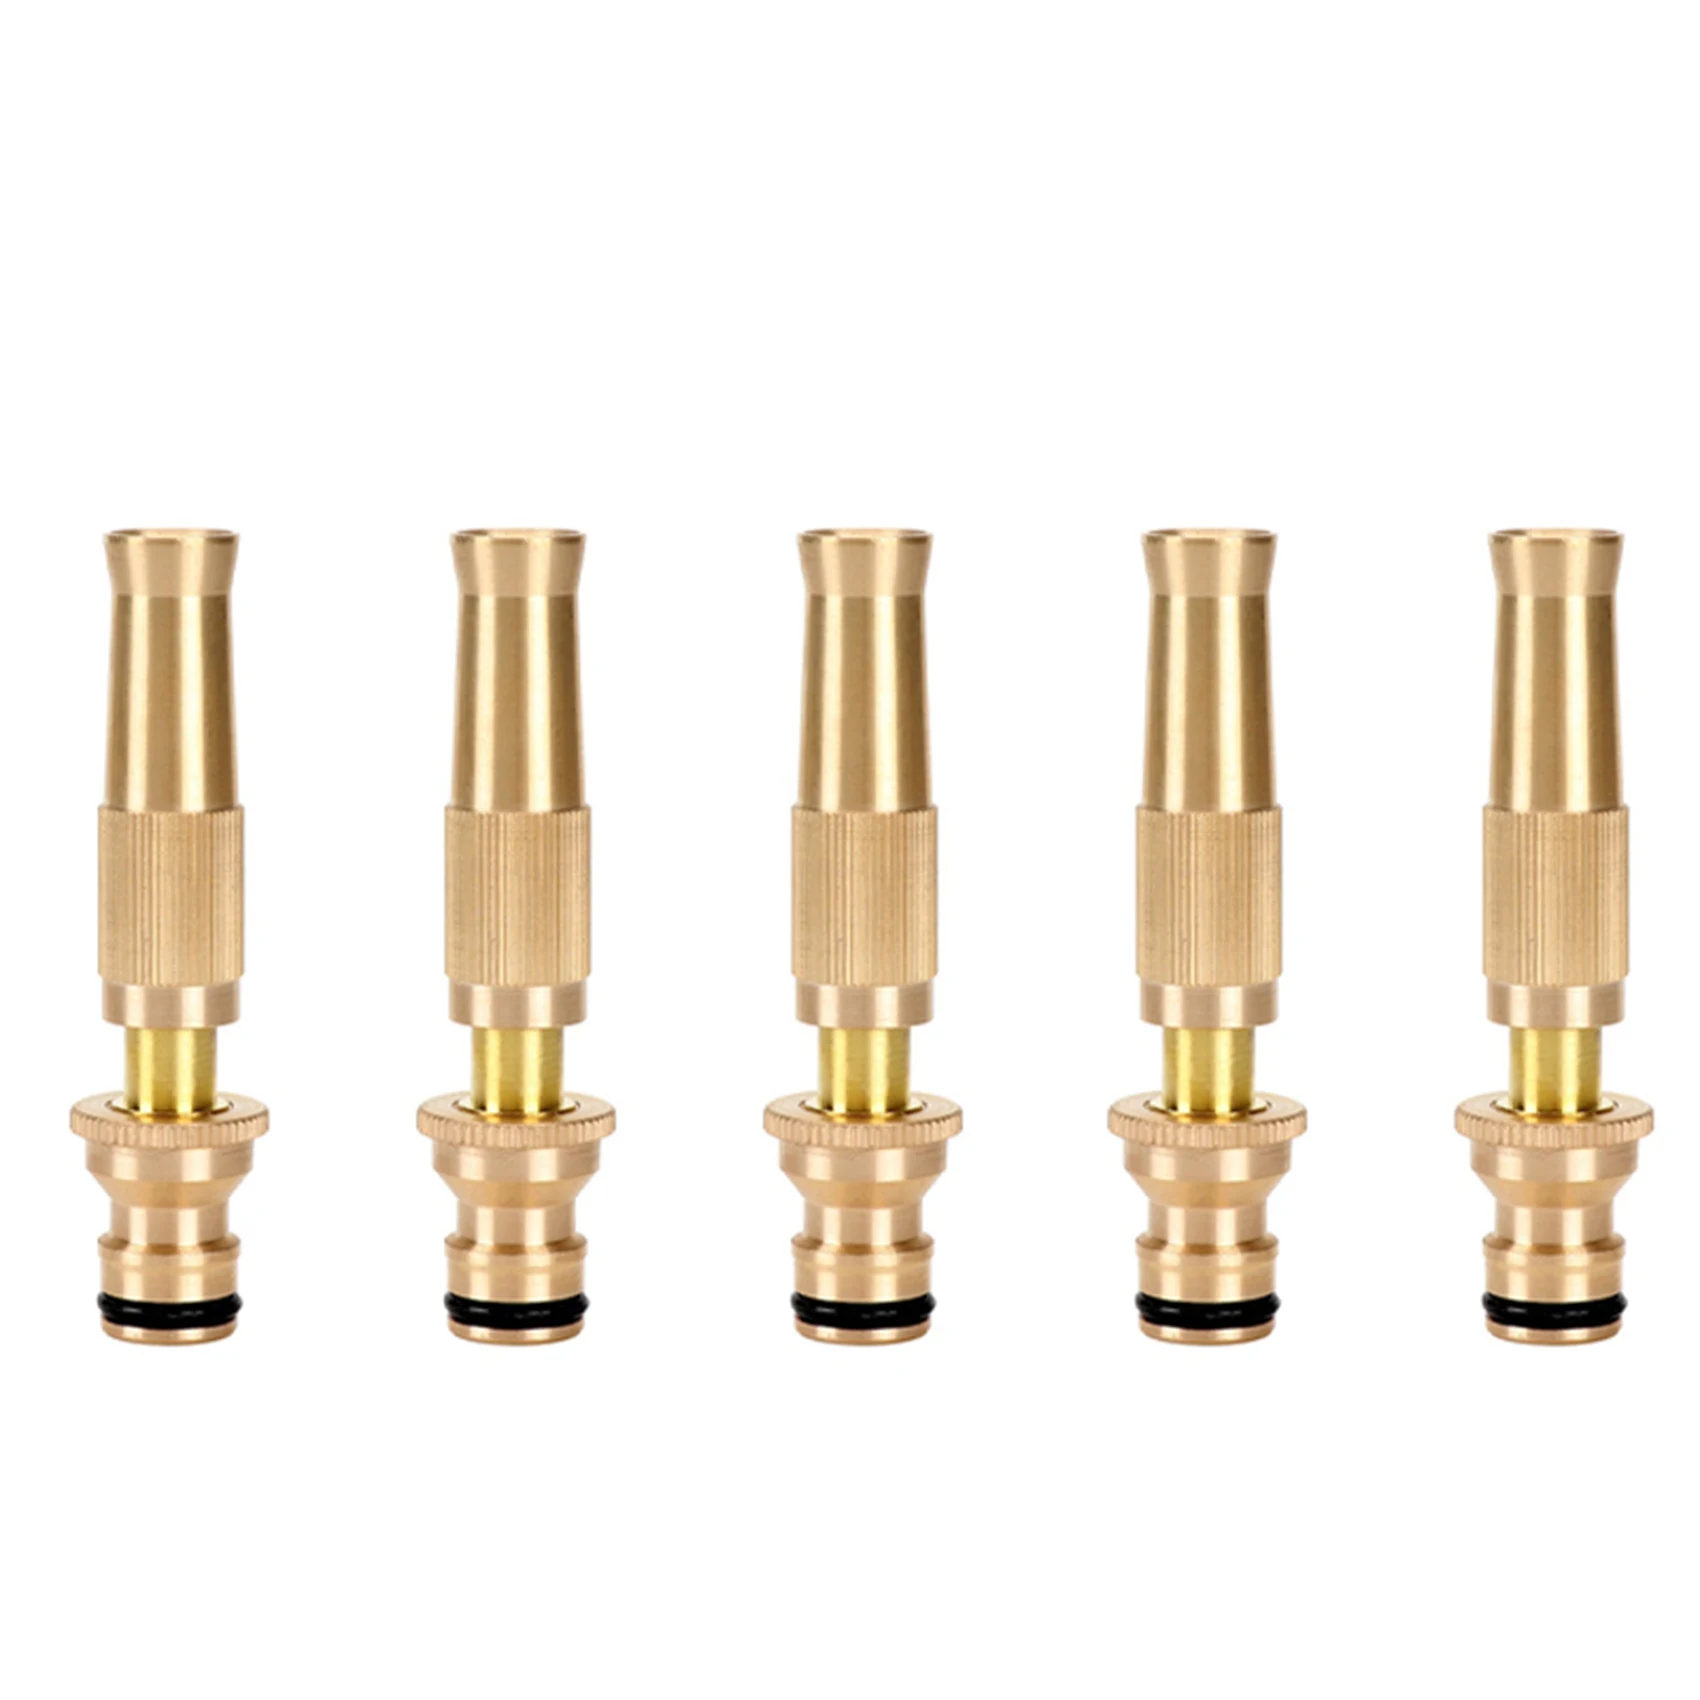 

5X High Pressure Hose Nozzle Heavy Duty , Brass Water Hose Nozzles for Garden Hoses, Adjustable Function